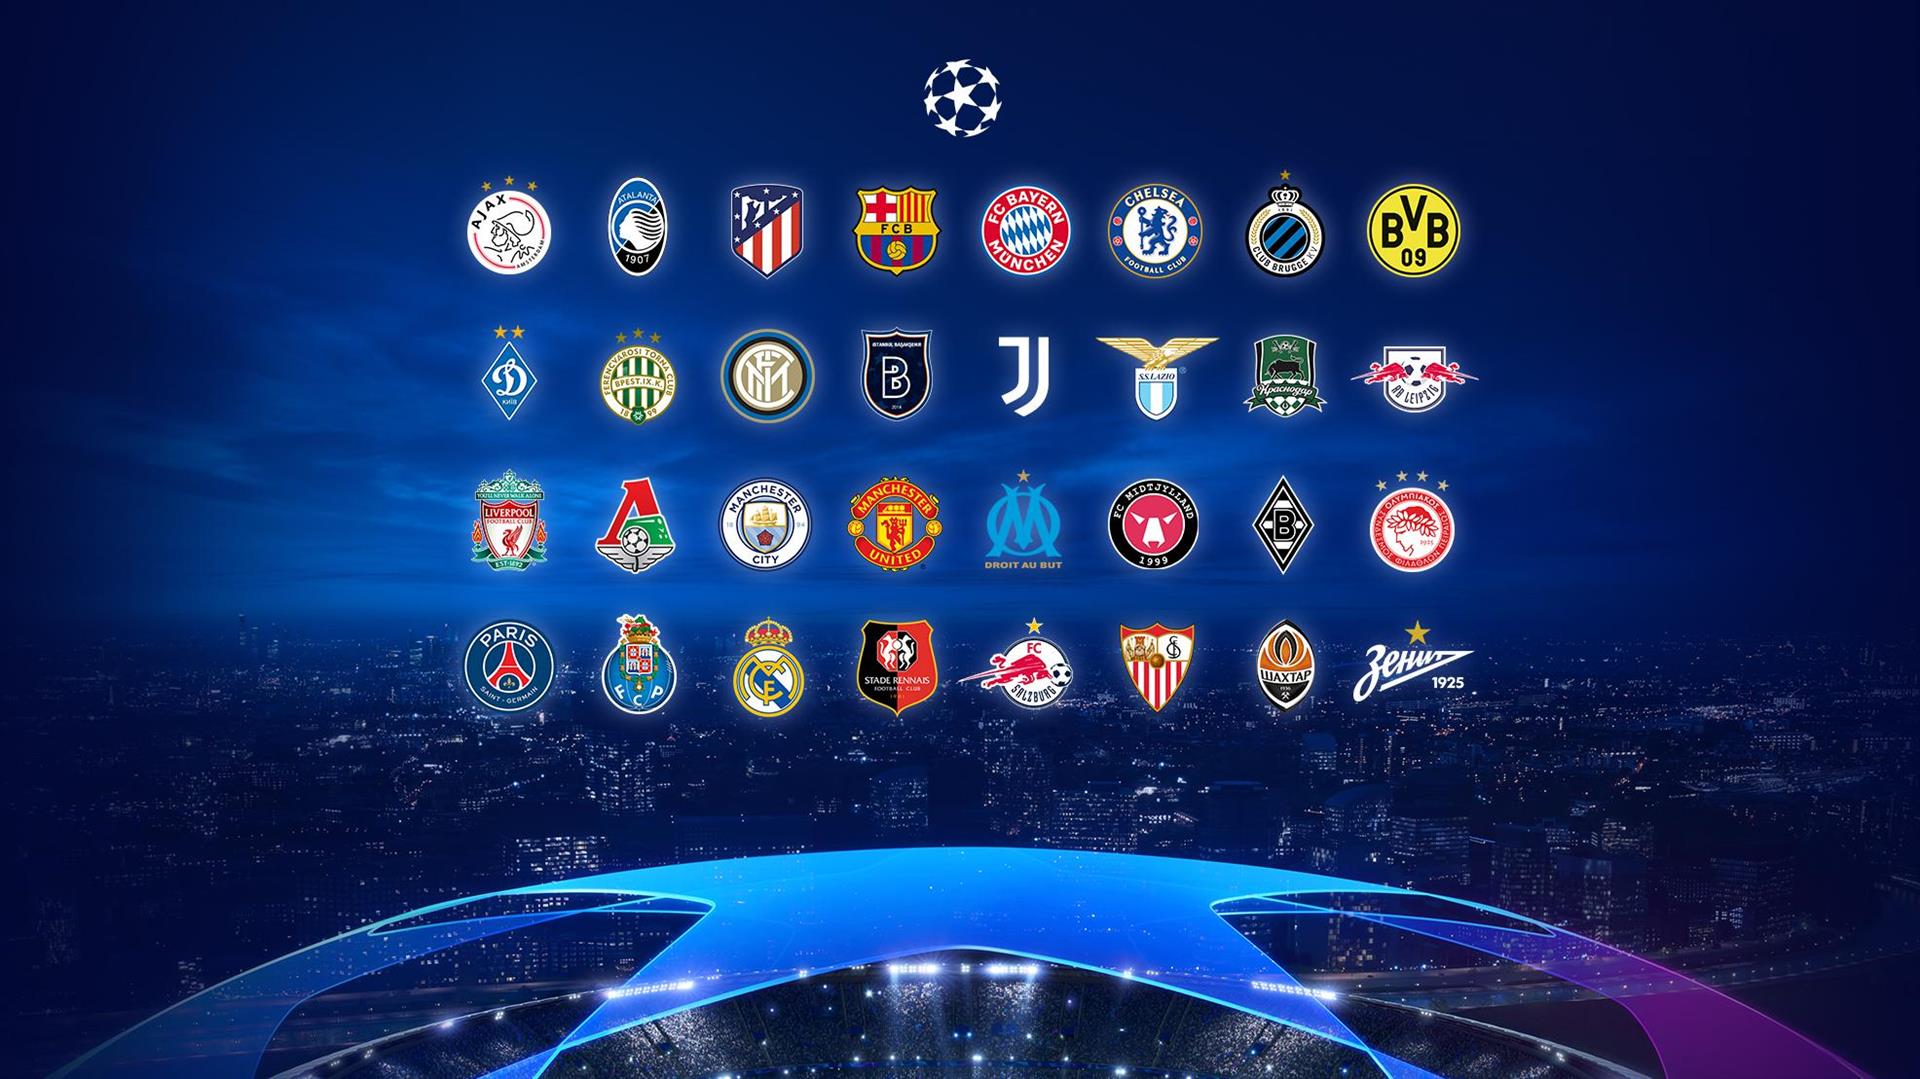 Meet the full group of FC Porto in the Champions League